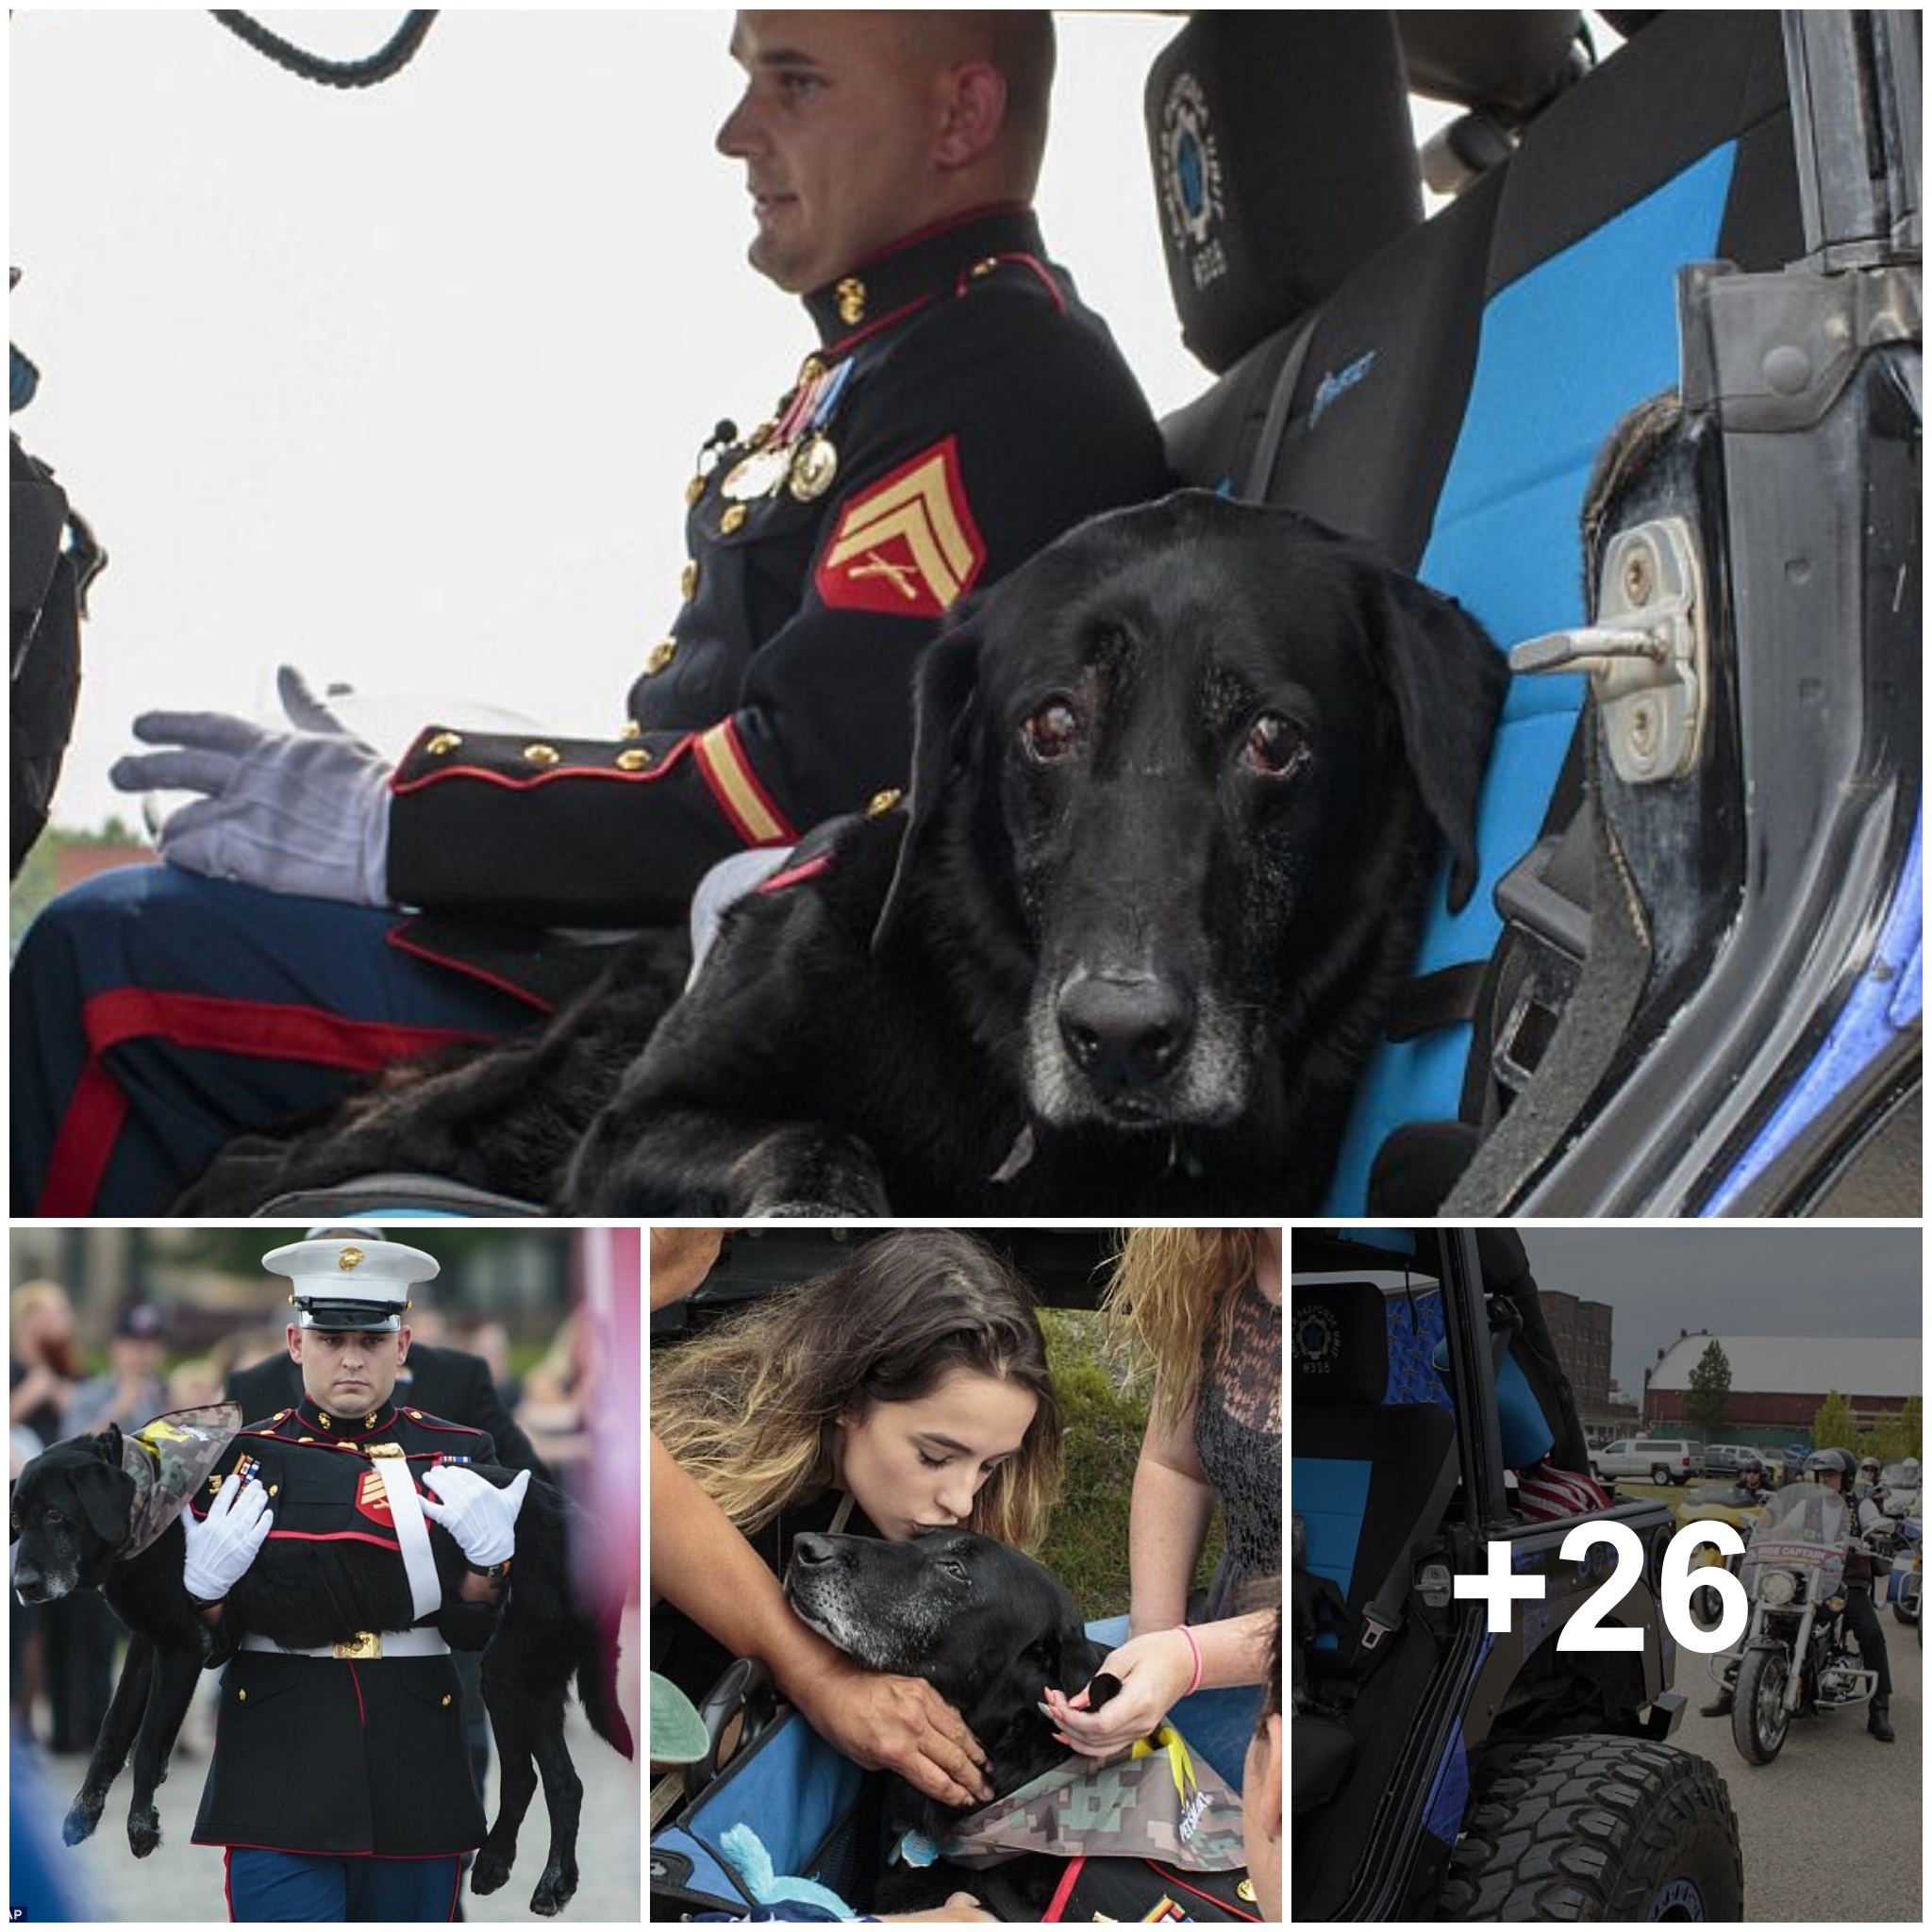 (Video) It was heartbreaking to see a marine give his beloved dying dog a touching and tearful final journey, hoping that his next life would be better.